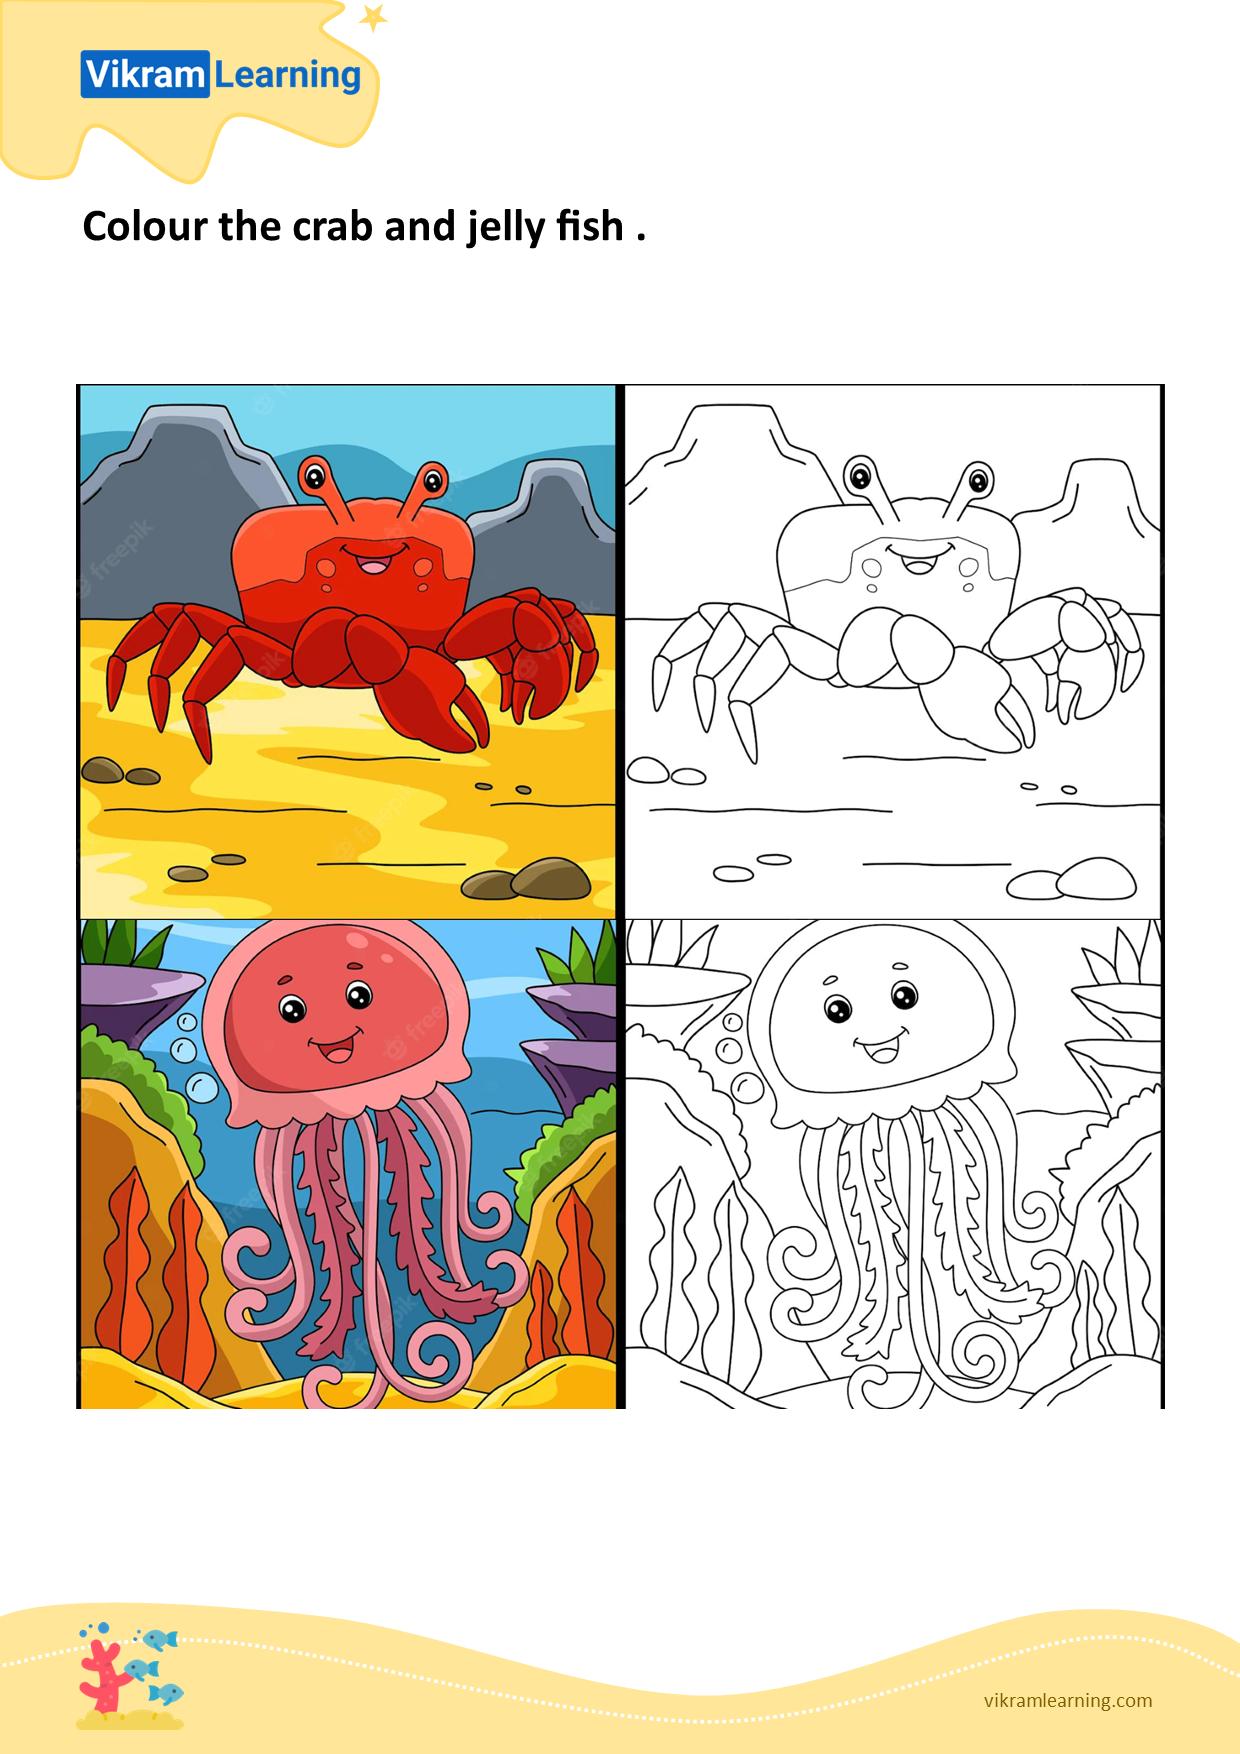 Download colour the crab and jelly fish worksheets